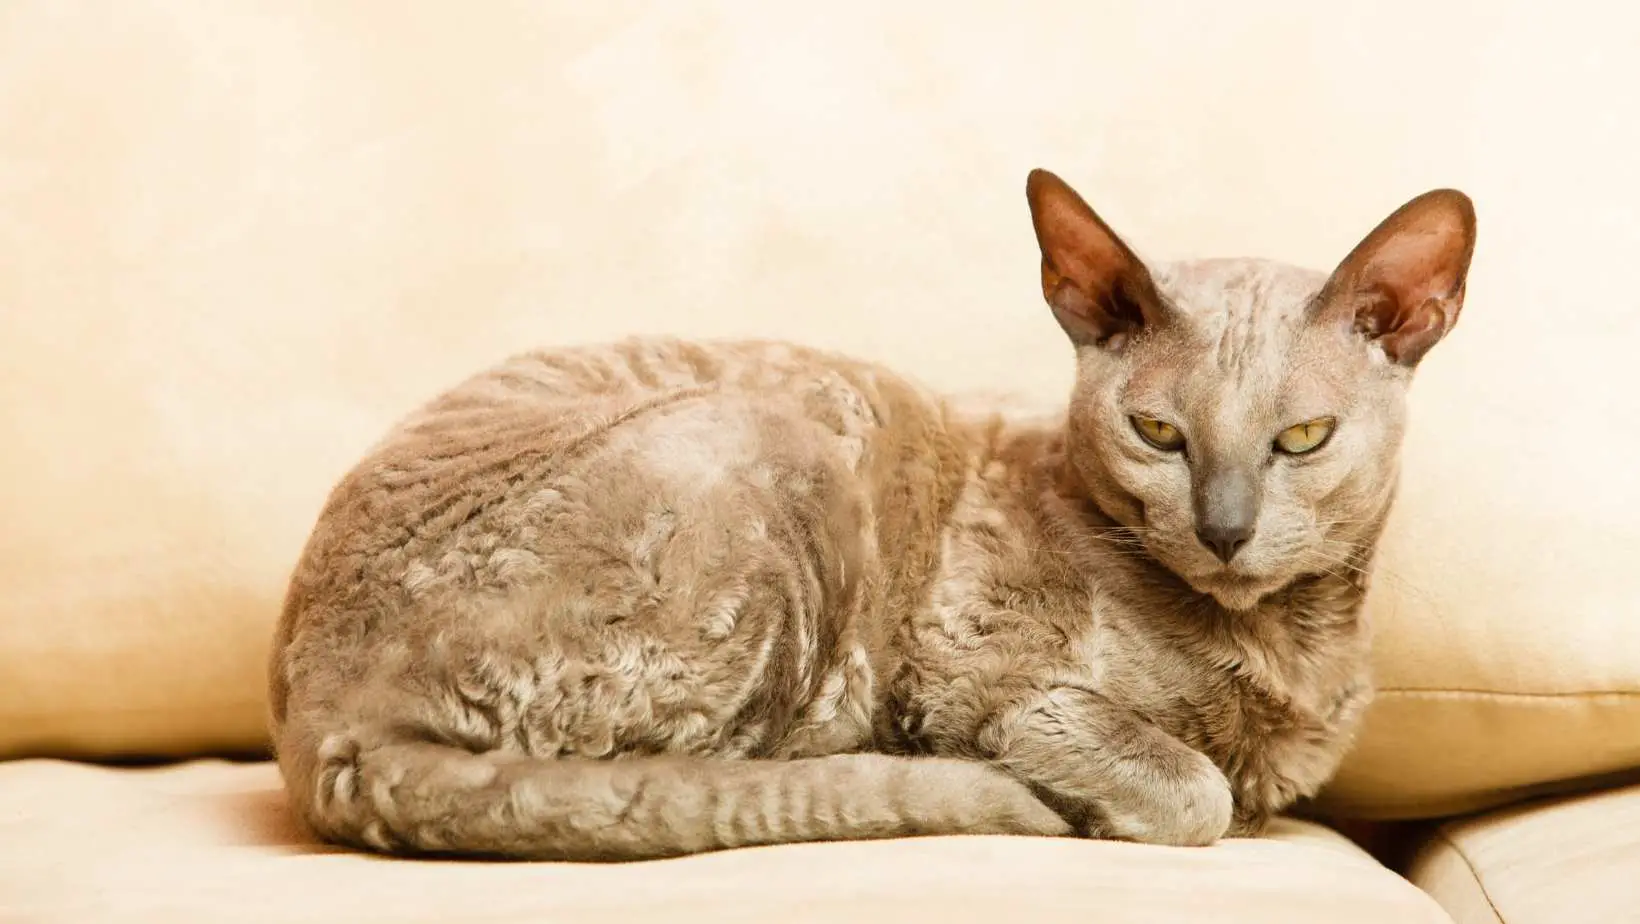 Are Egyptian Mau cats hypoallergenic?